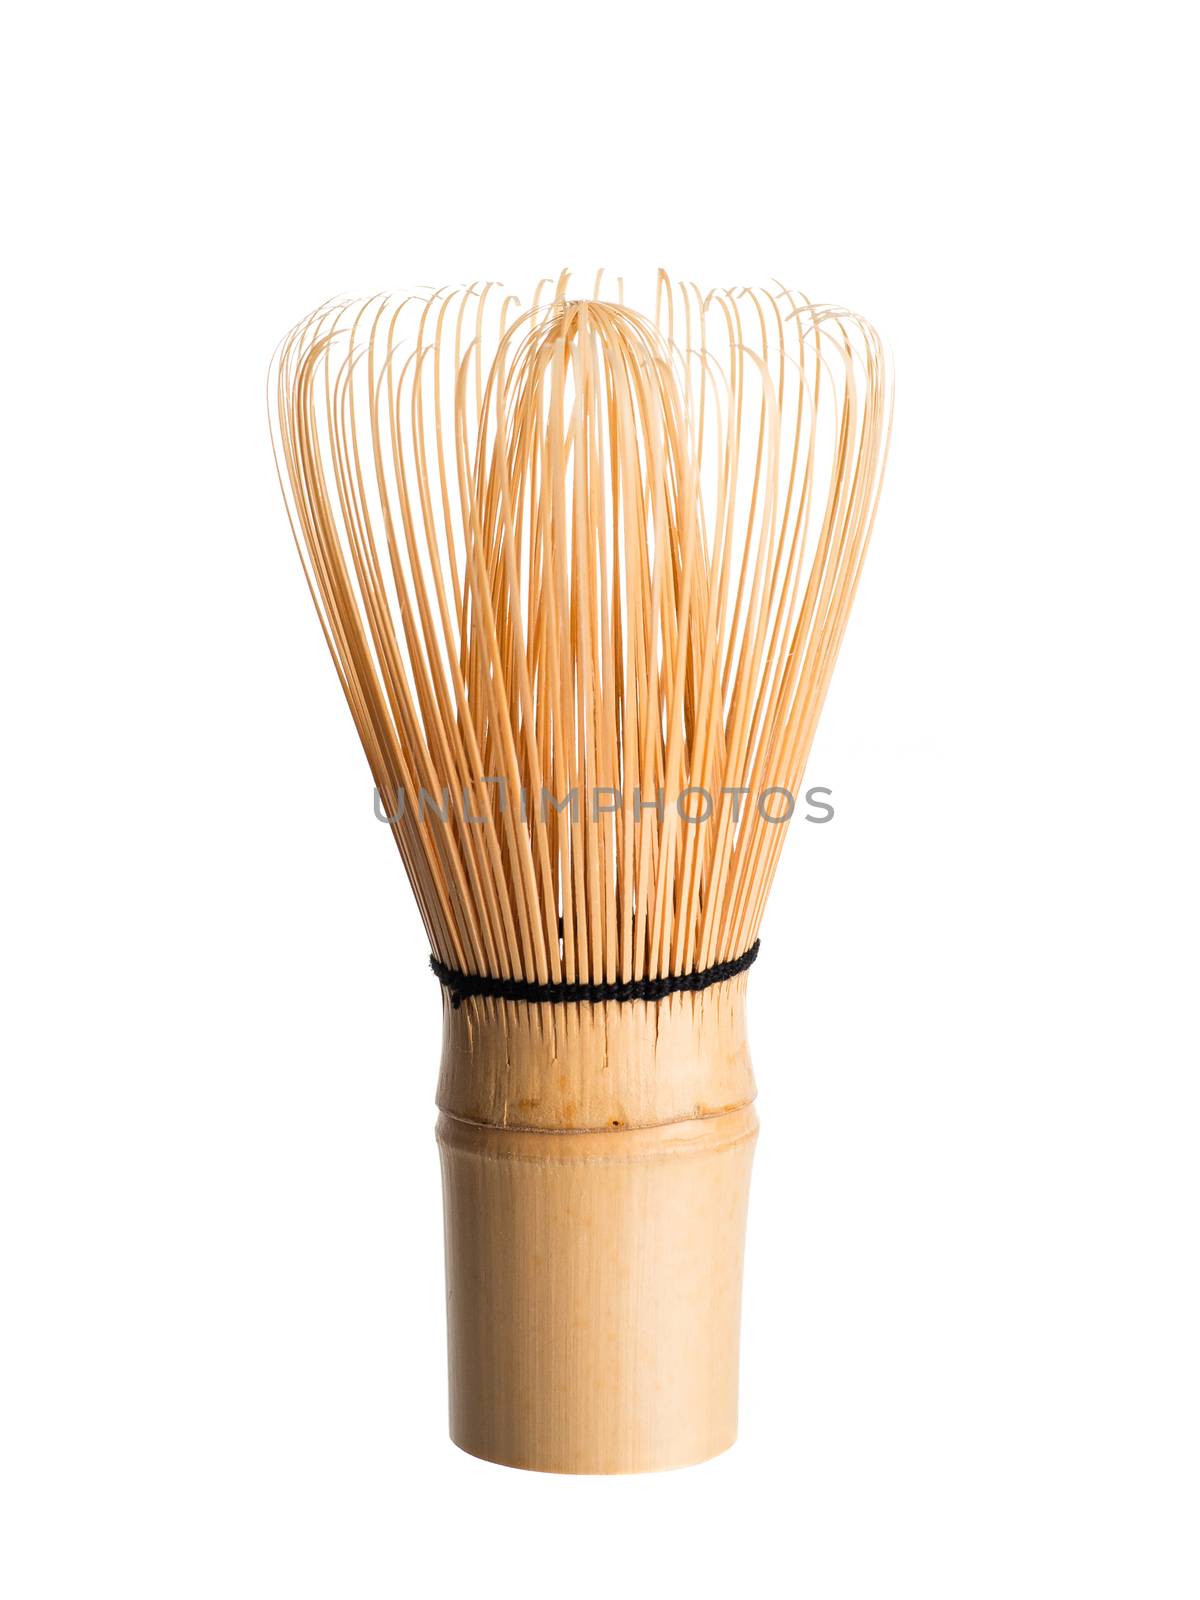 Bamboo Matcha Tea Whisk also know as chasen. Isolated on white background. Chasen use for japan green match tea